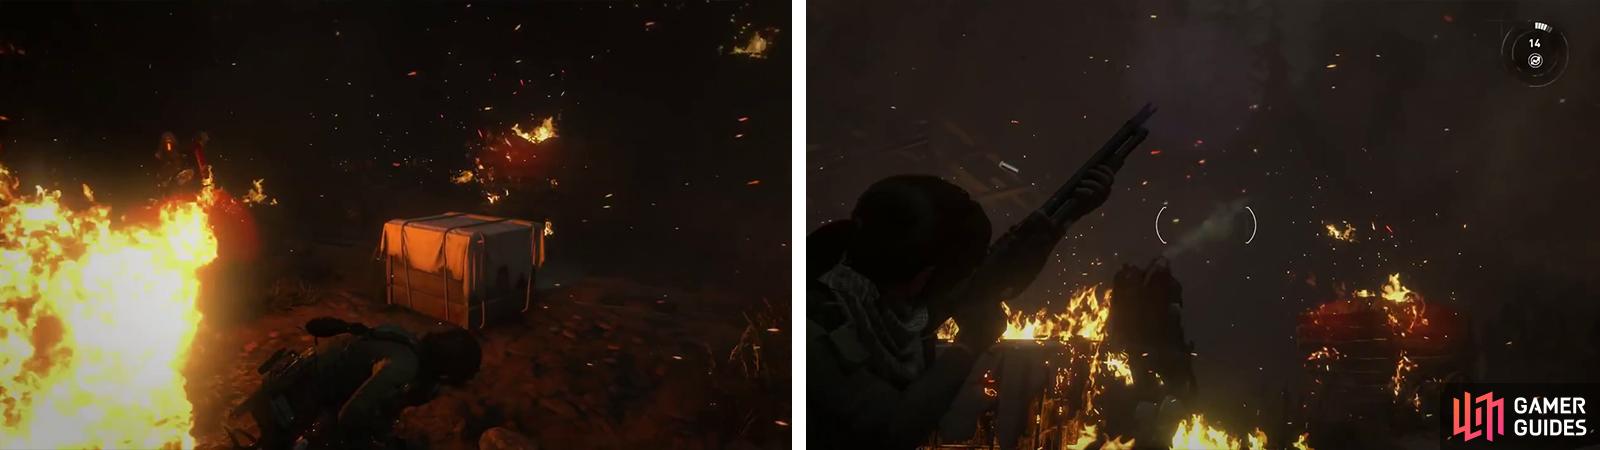 When fighting the Flamethrower avoid the fire (left) and get behind him (right) so you can shoot him in the back.